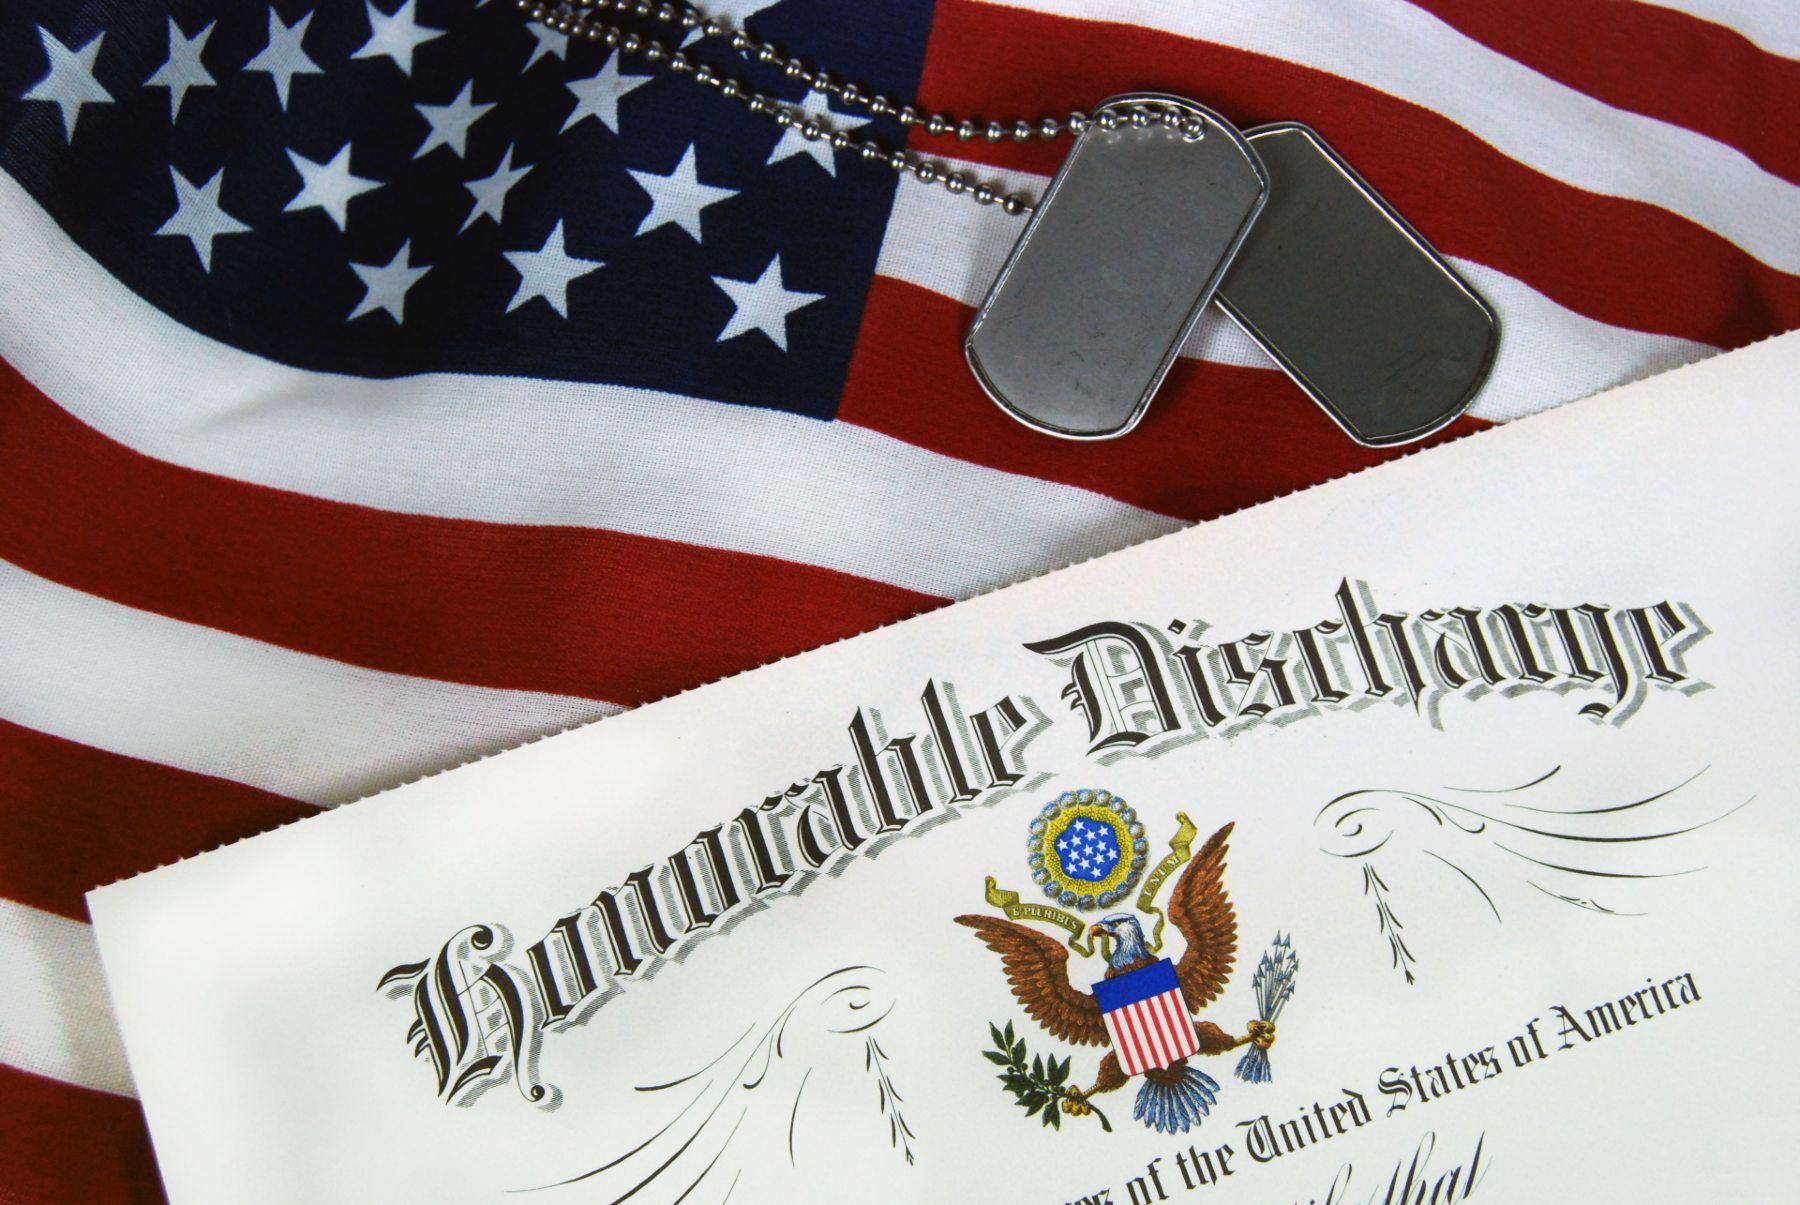 An honorable discharge certificate lies next to blank dog tags on top of a U.S. flag